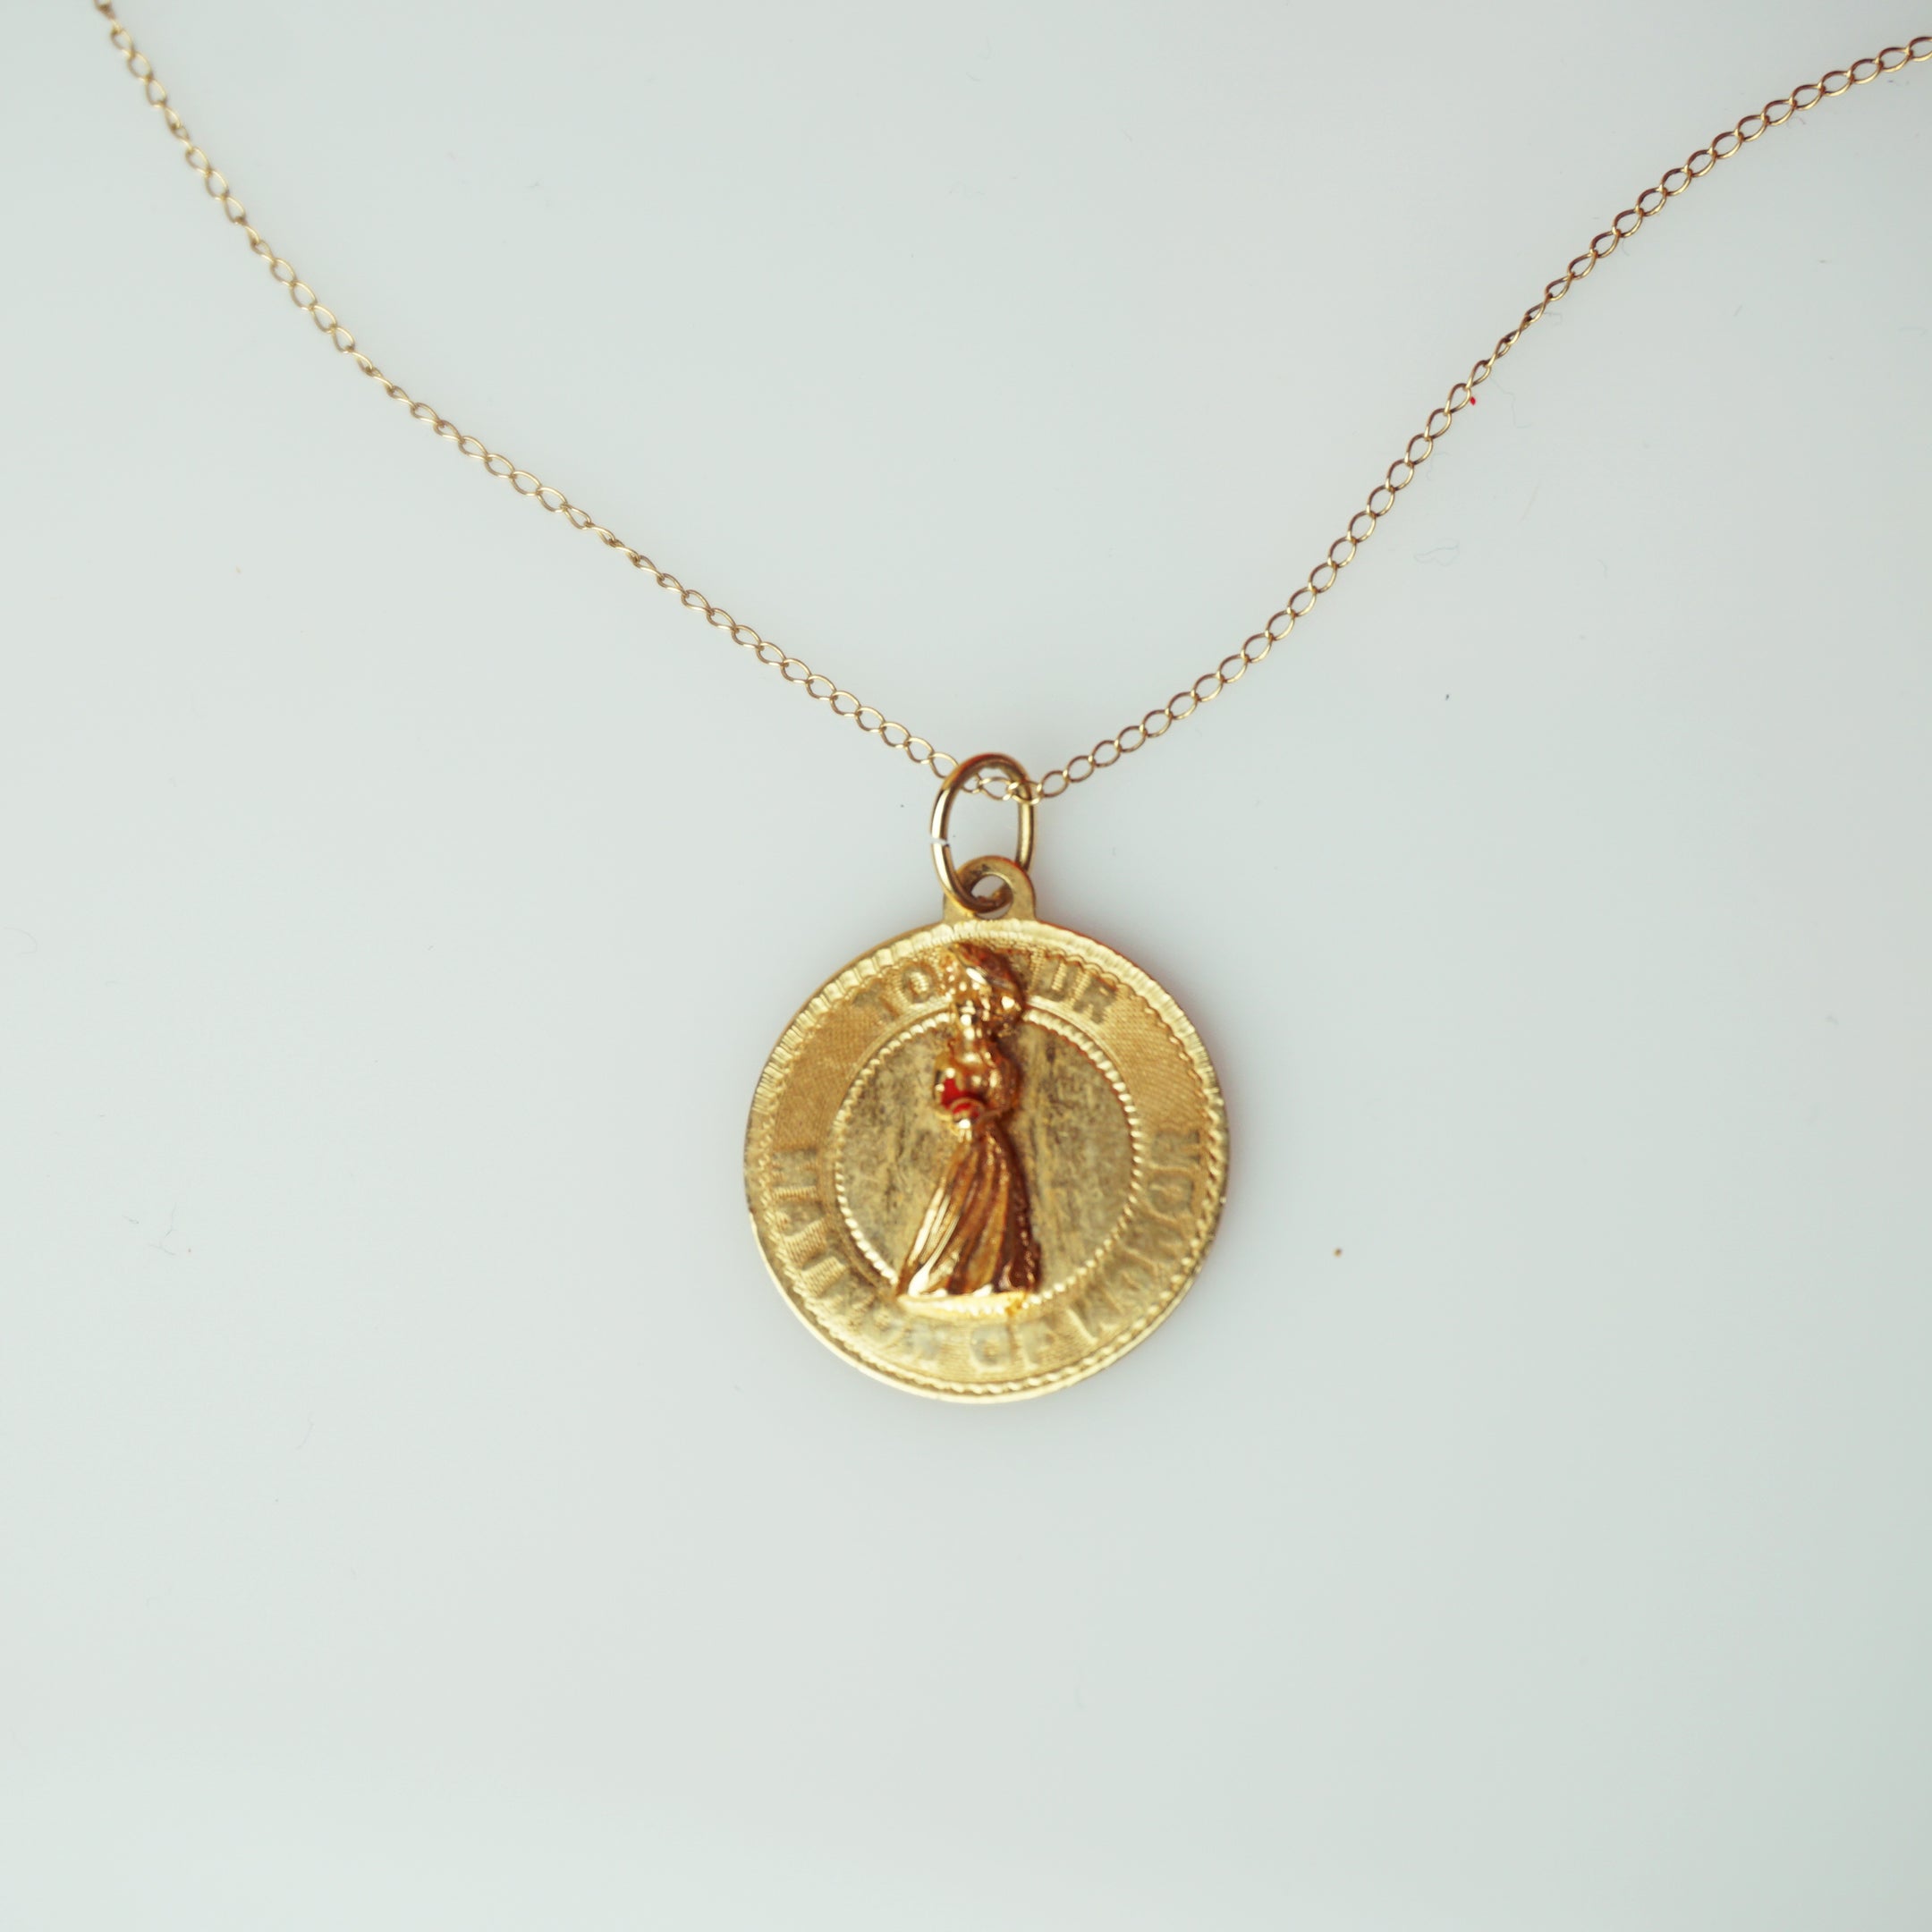 1963 Vintage 14K Gold Coin Drop Matron of Honor Necklace. Dated 1-12-63.